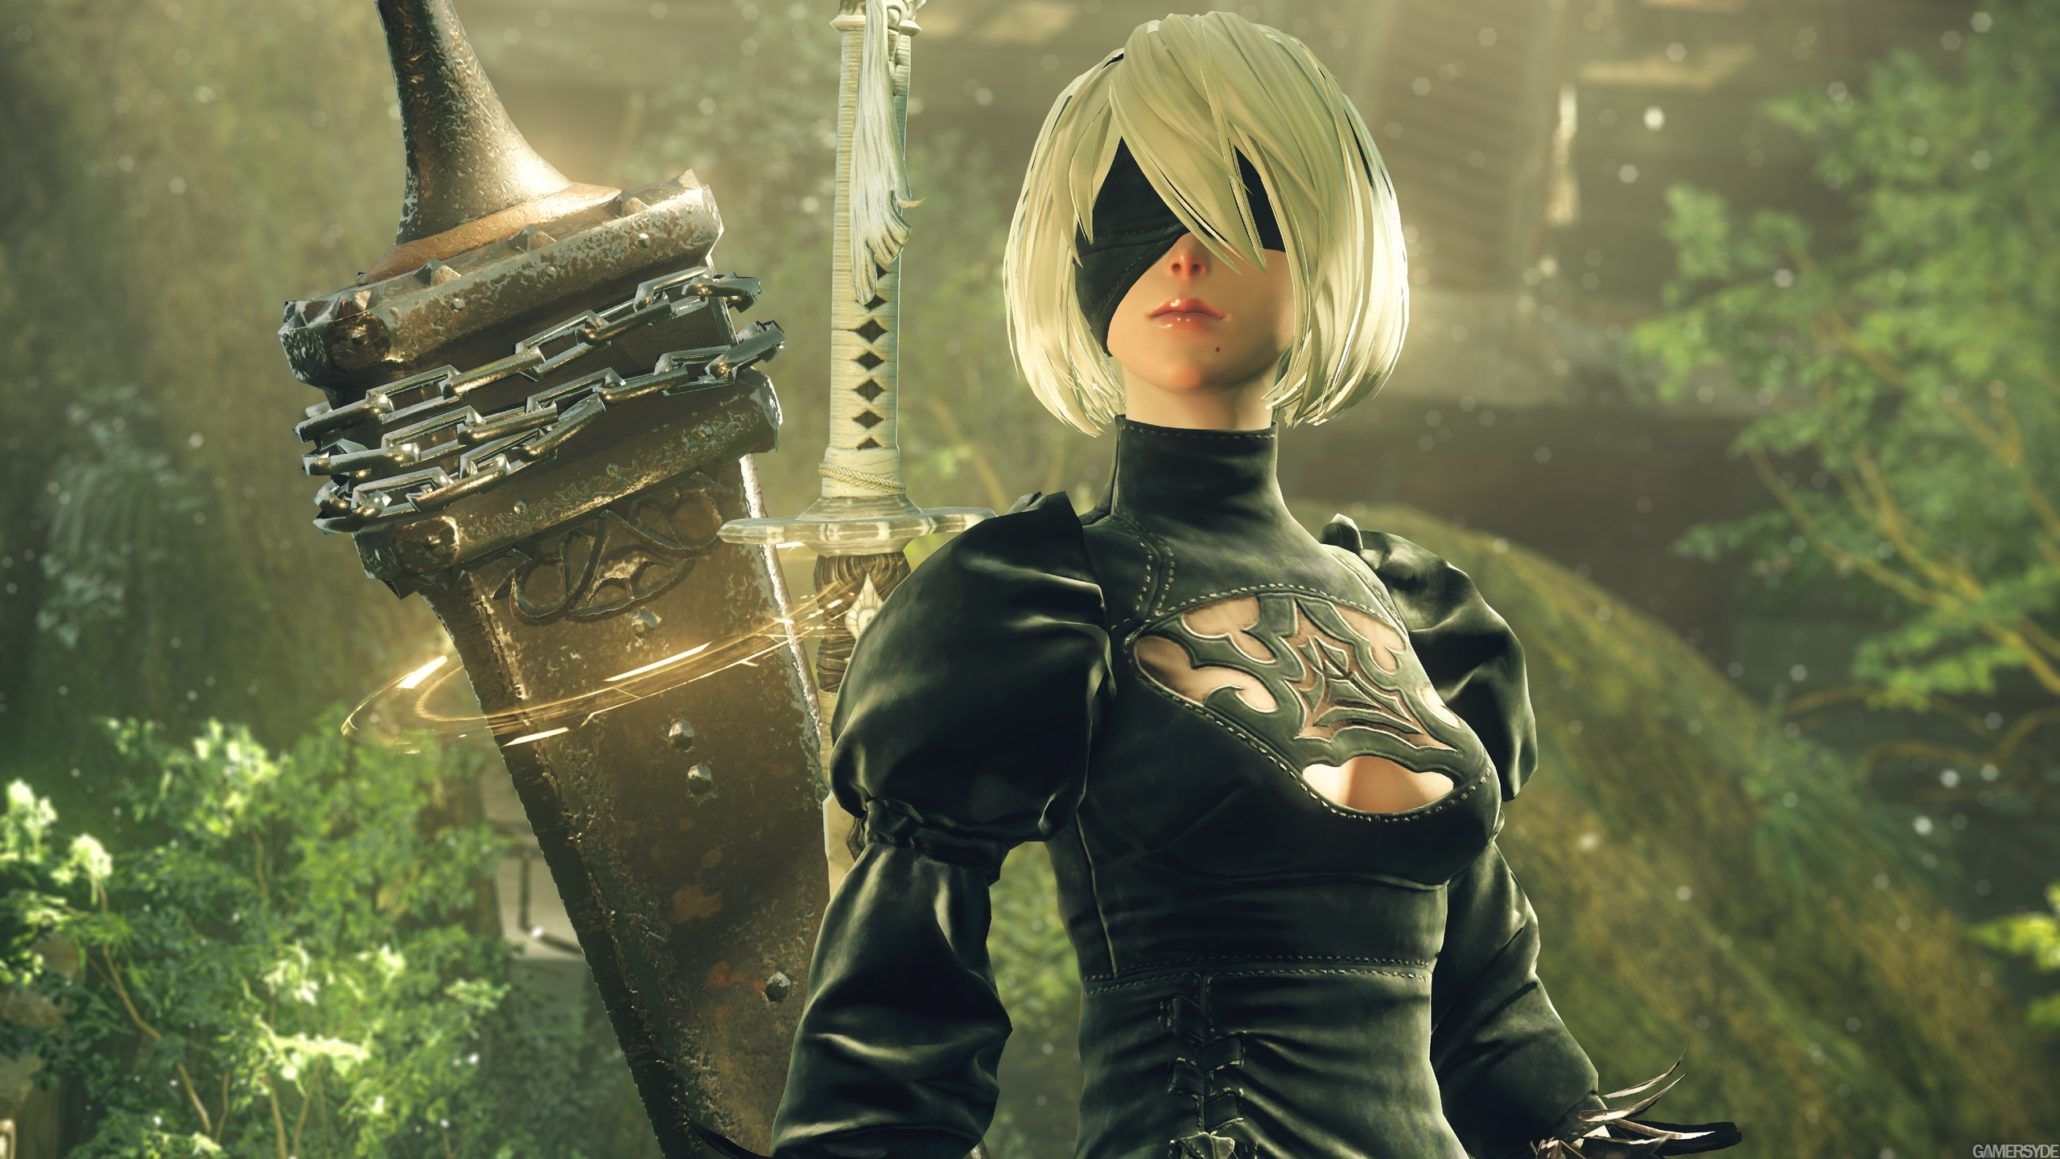 NieR:Automata BECOME AS GODS Edition Coming to Xbox Game Pass in April